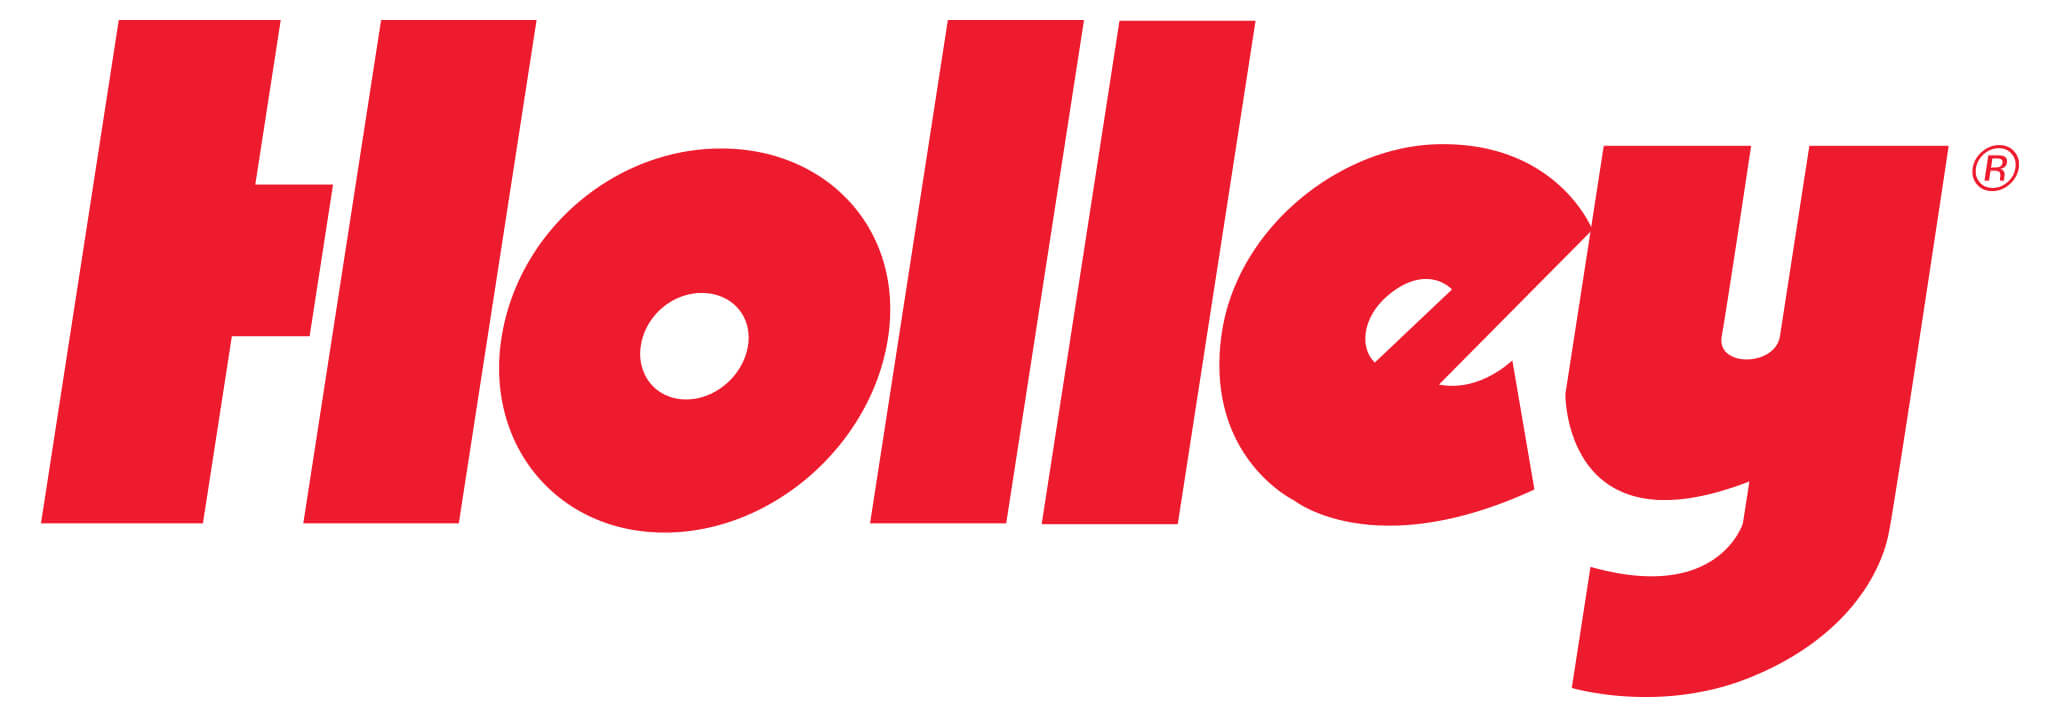 Holley Appoints New CFO | THE SHOP